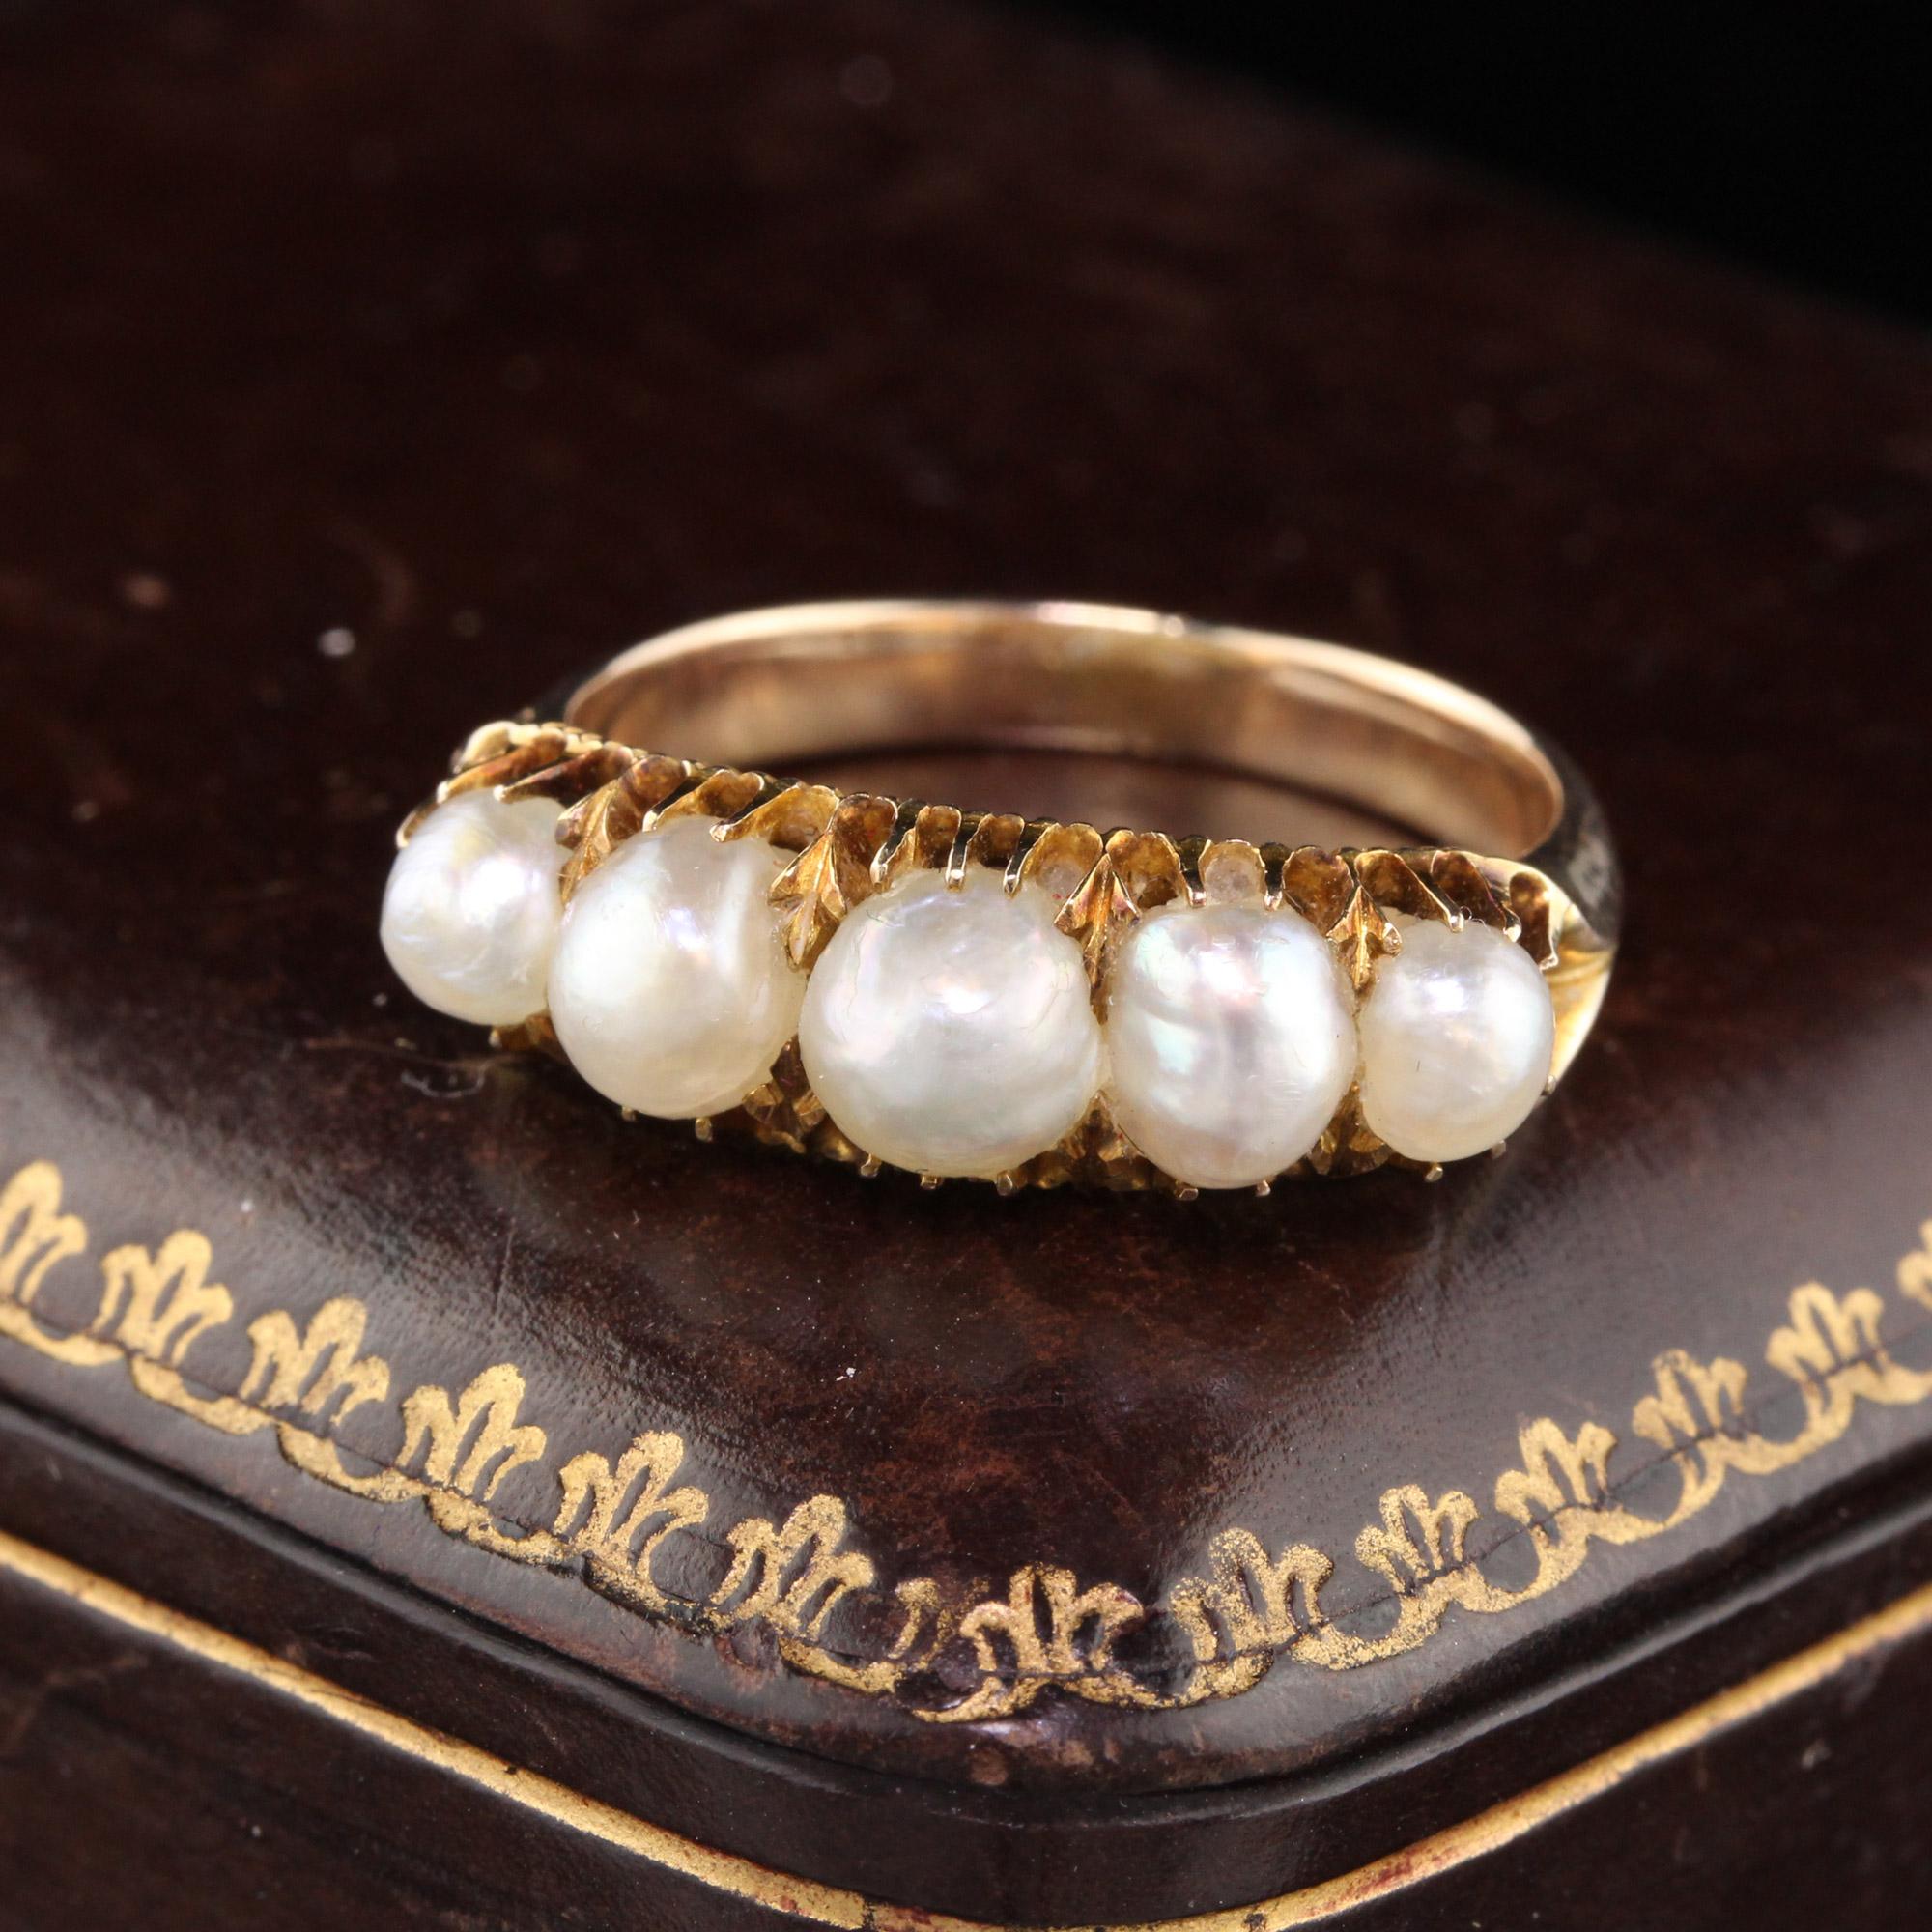 Gorgeous classic Victorian Natural Pearl Half Hoop Ring set in yellow gold.

#R0266

Metal: 14K Yellow Gold 

Weight: 4 Grams

Ring Size: 6 3/4 (sizable)

This ring can be sized for a $30 fee!

*Please note that we cannot accept returns on sized